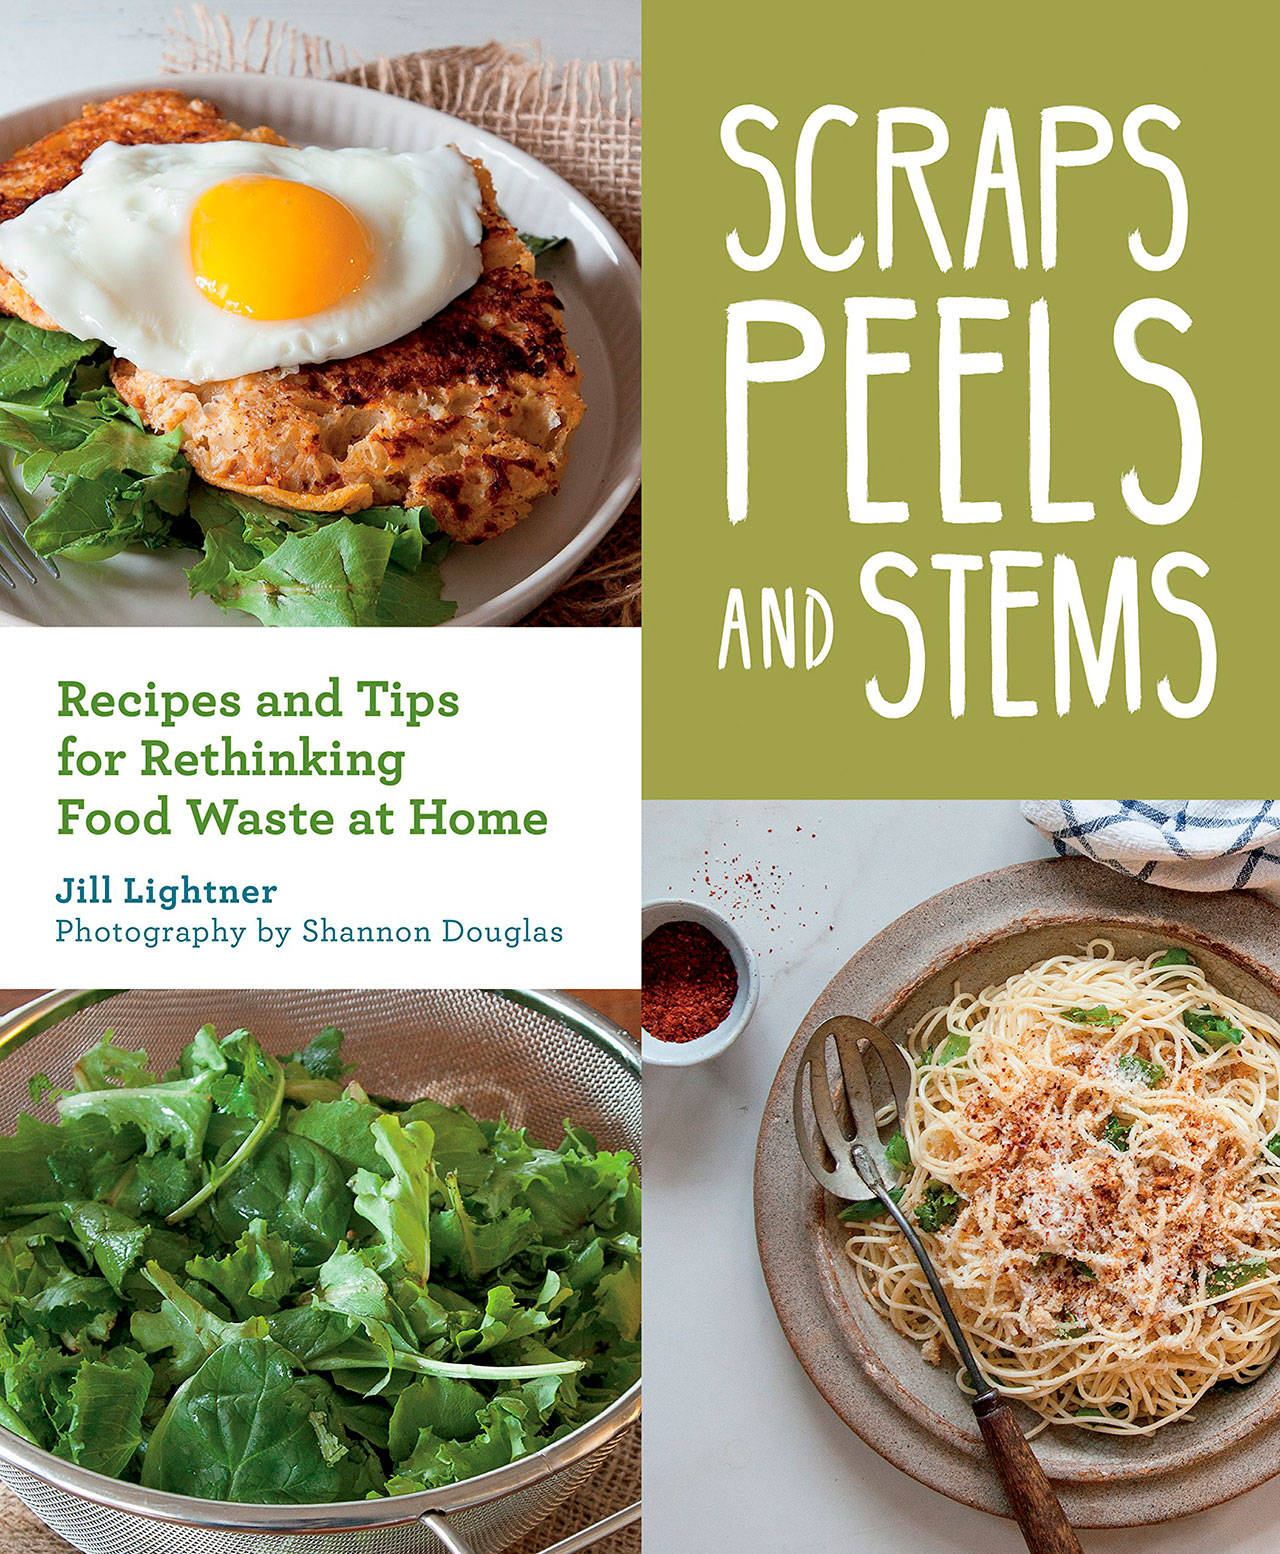 Image courtesy of Eagle Harbor Book Company | Seattle author Jill Lightner will talk about her new cookbook, “Scraps, Peels, and Stems: Recipes and Tips for Rethinking Food Waste at Home,” at 3 p.m. Sunday, Nov. 18 at Eagle Harbor Book Company.